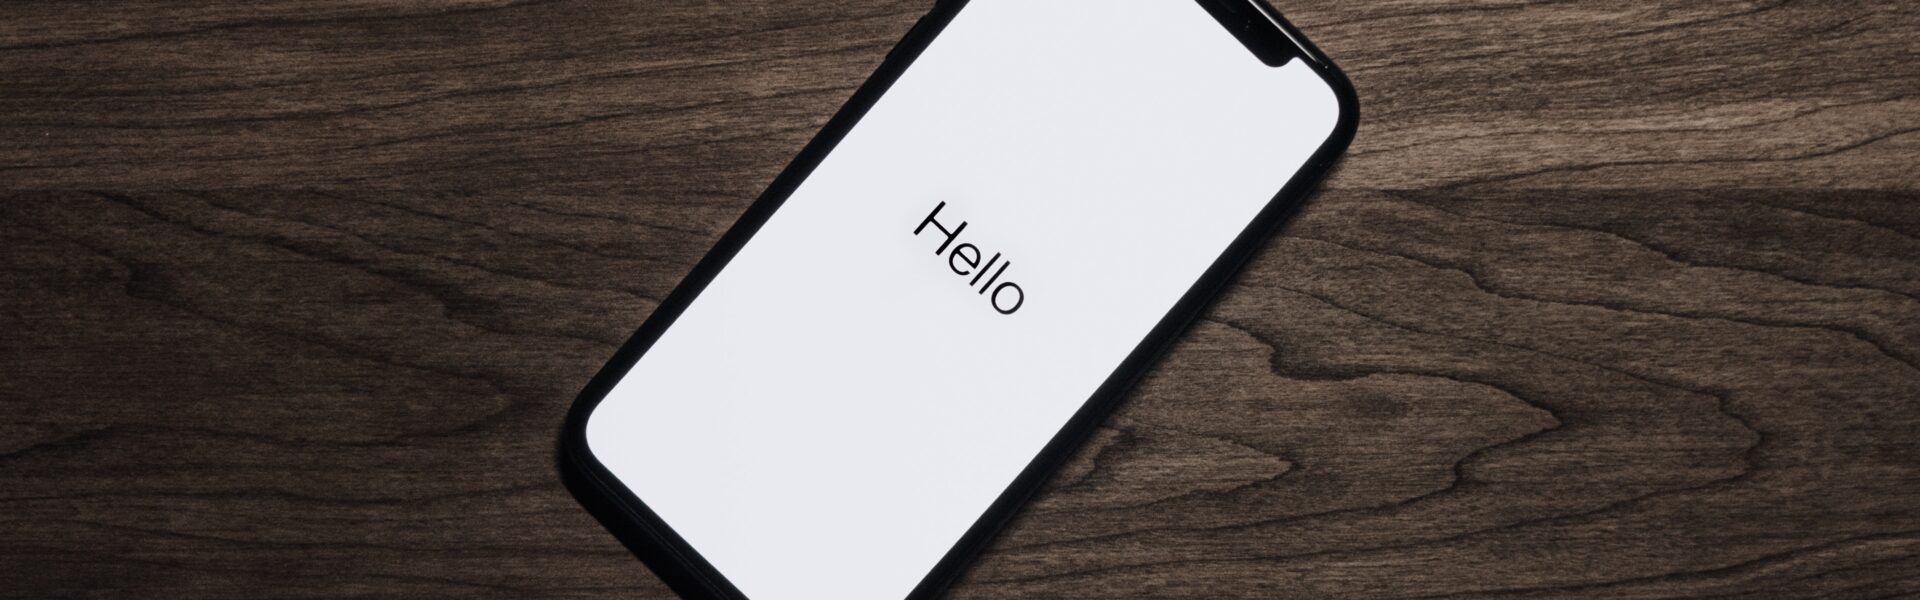 Smartphone on a table with 'hello' on the screen